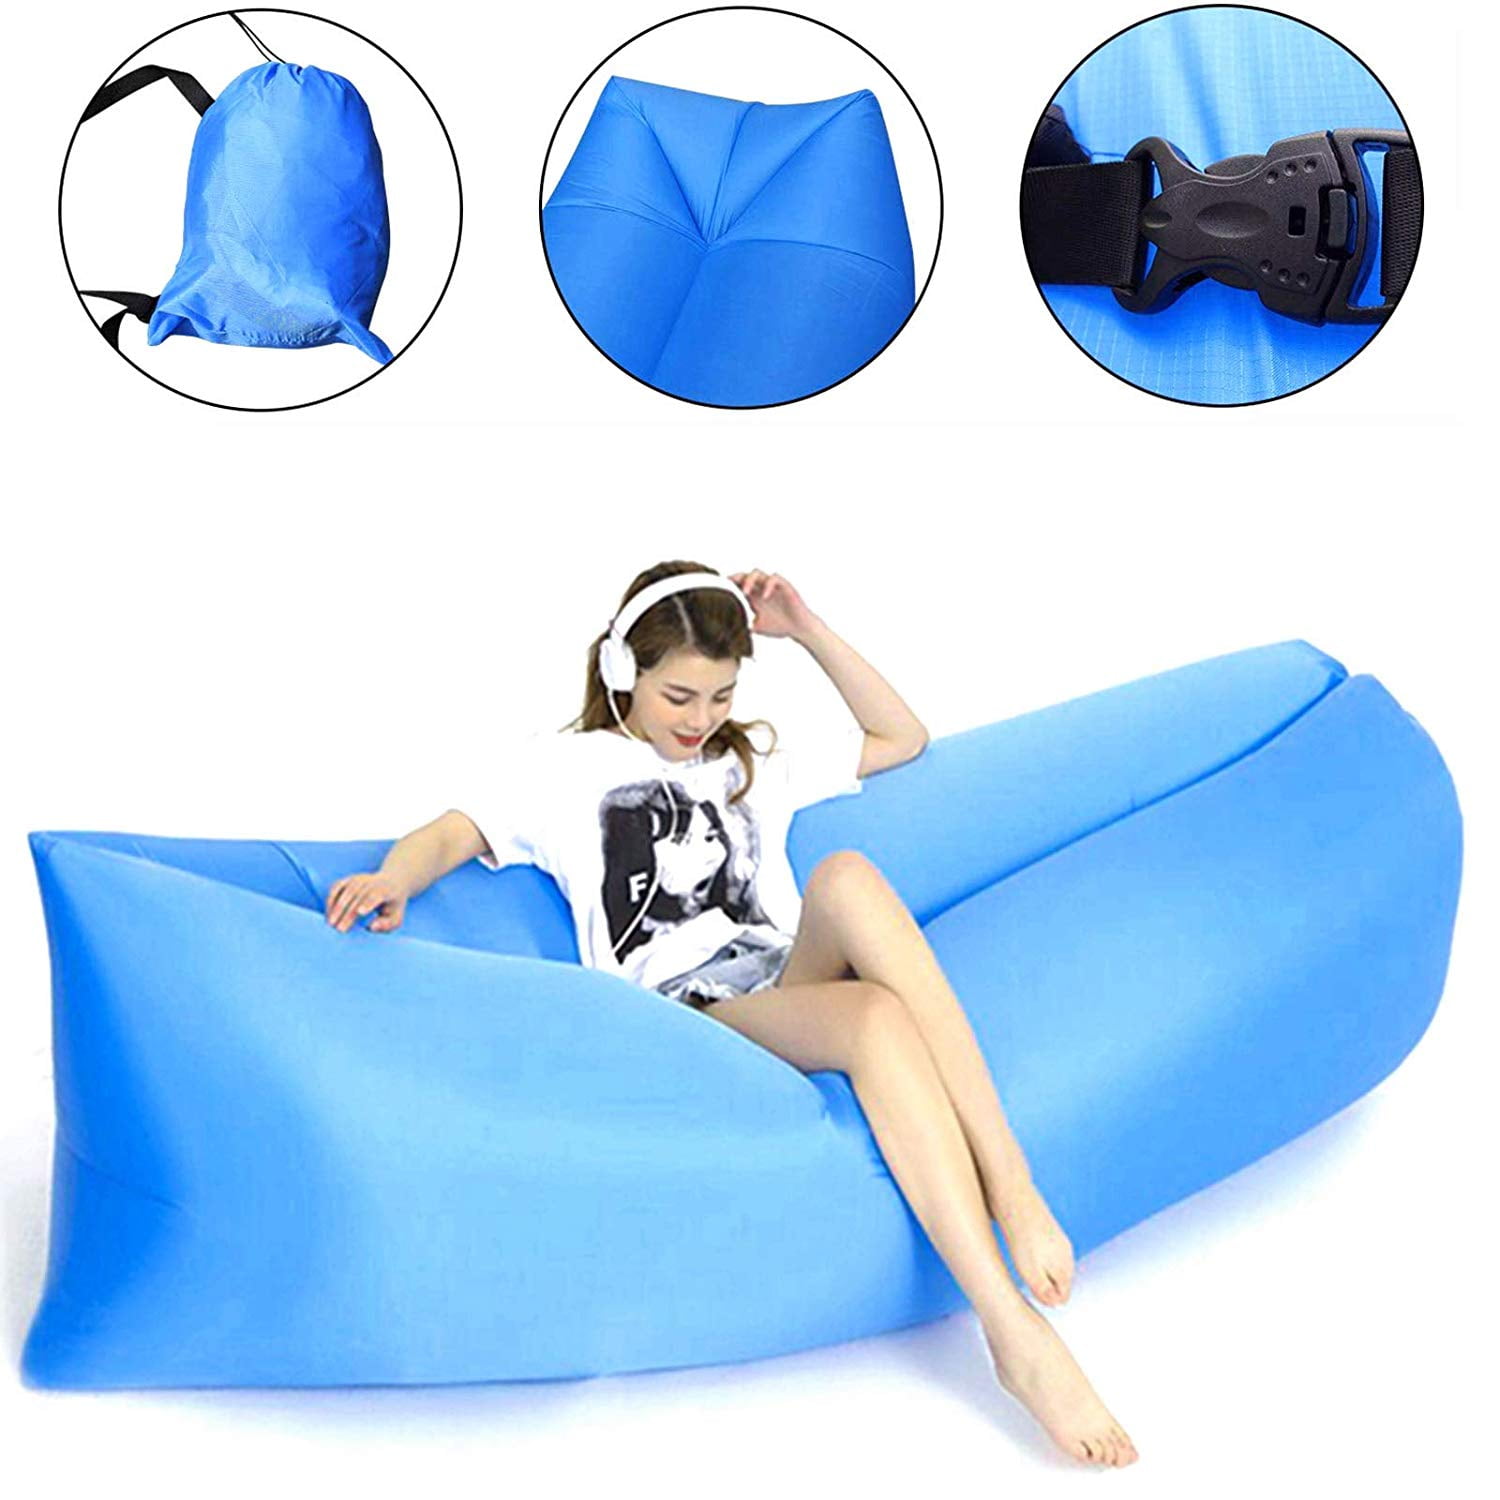 Portable Outdoor Inflatable Lazy Air Sofa Bed Lounger Couch Chair Camping Beach 